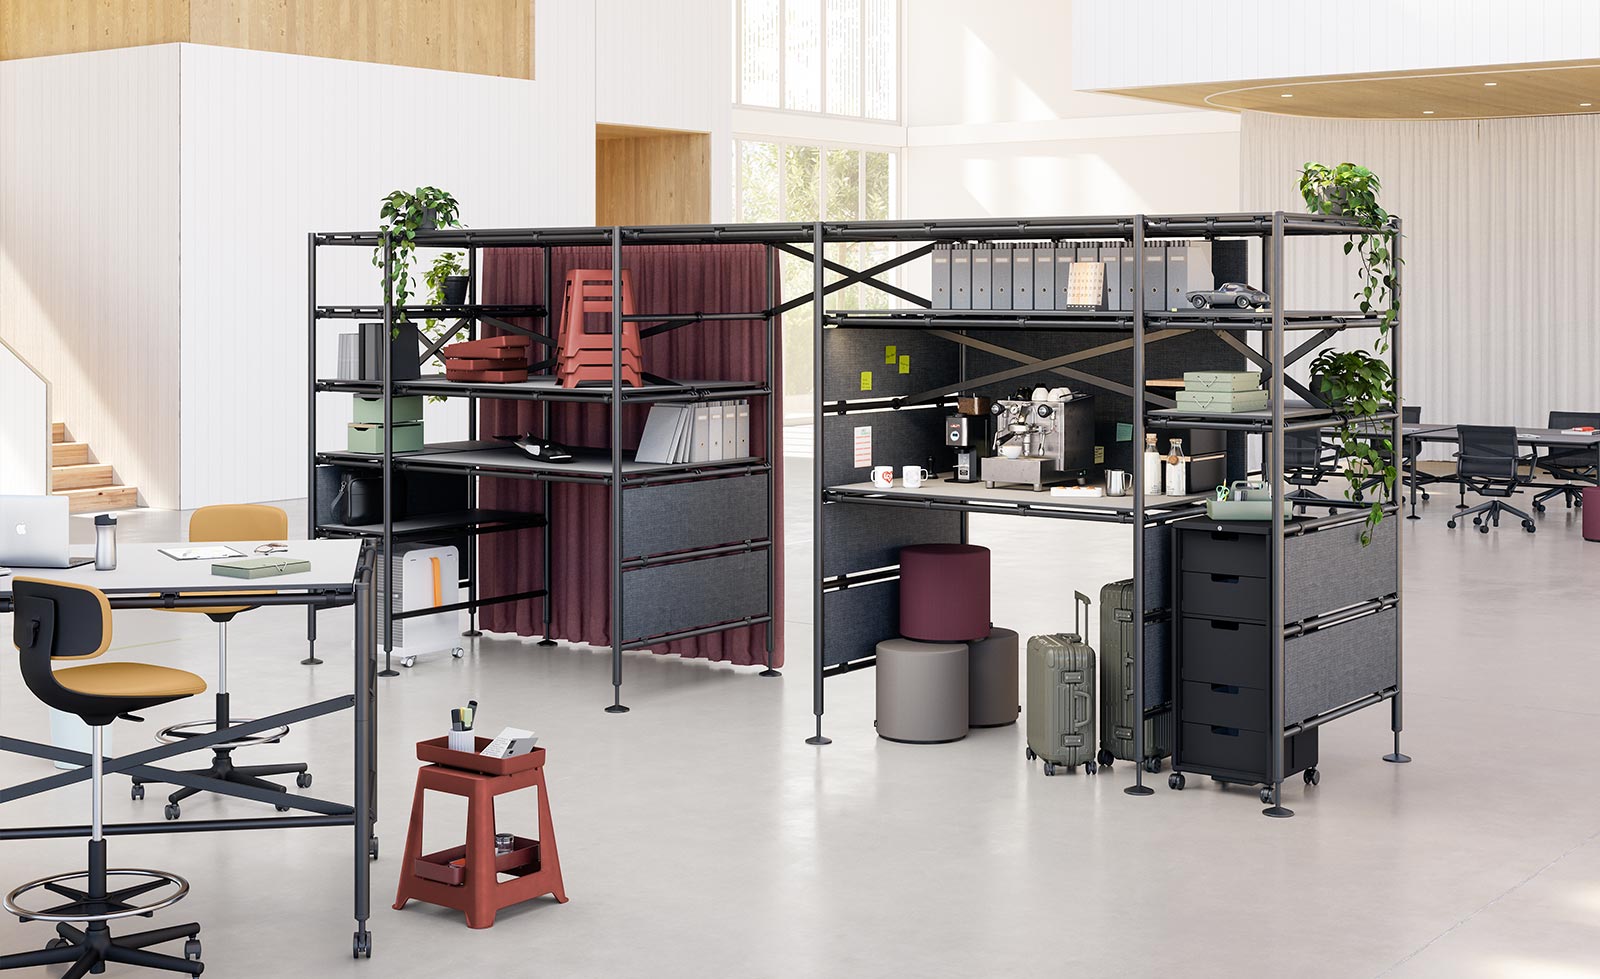 Think Furniture - Hybrid Office Design - Vitra Comma Office System